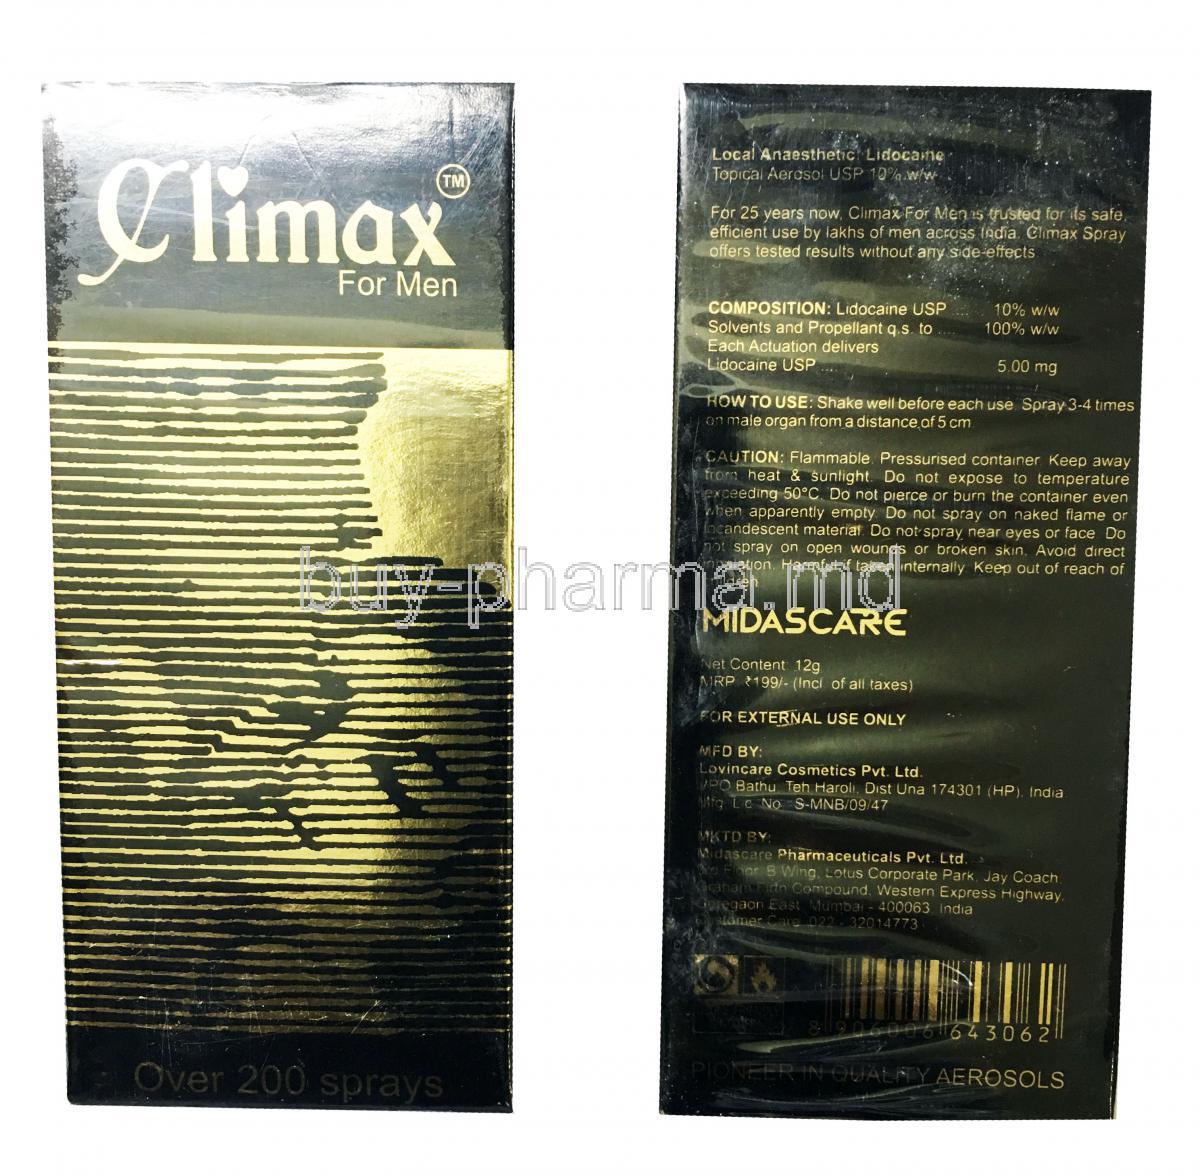 Climax, Lidocaine Spray, For Men, Box front and back presentation, Midascare